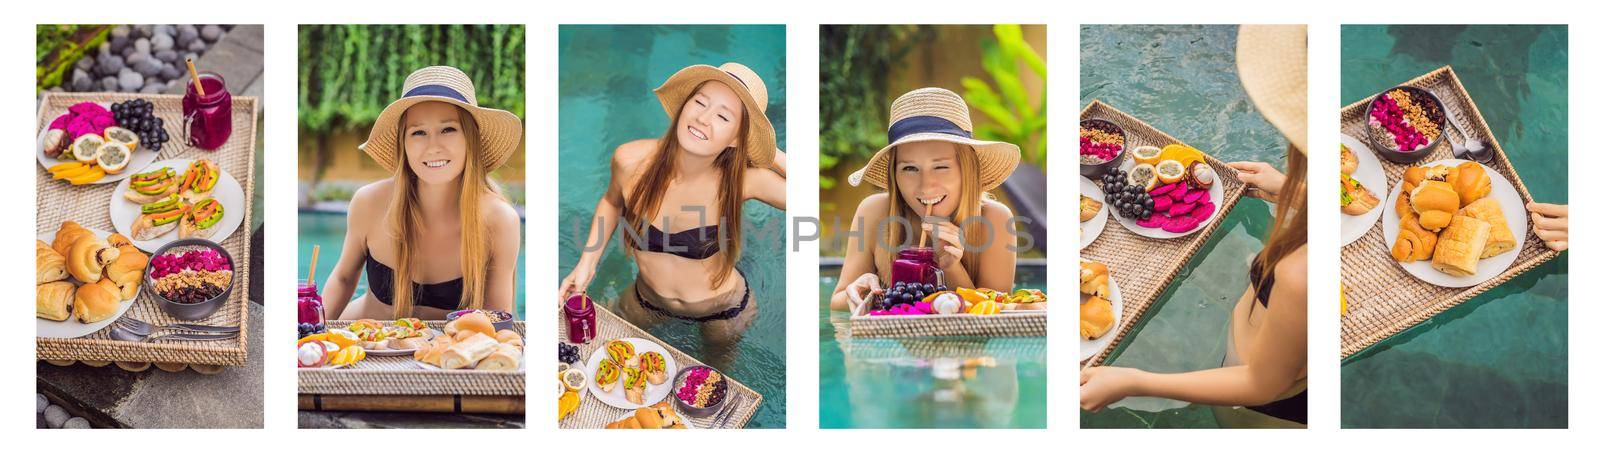 Set of template stories format. Breakfast on a tray with fruit, buns, avocado sandwiches, smoothie bowl by the pool. Summer healthy diet, vegan breakfast. Tasty vacation concept.